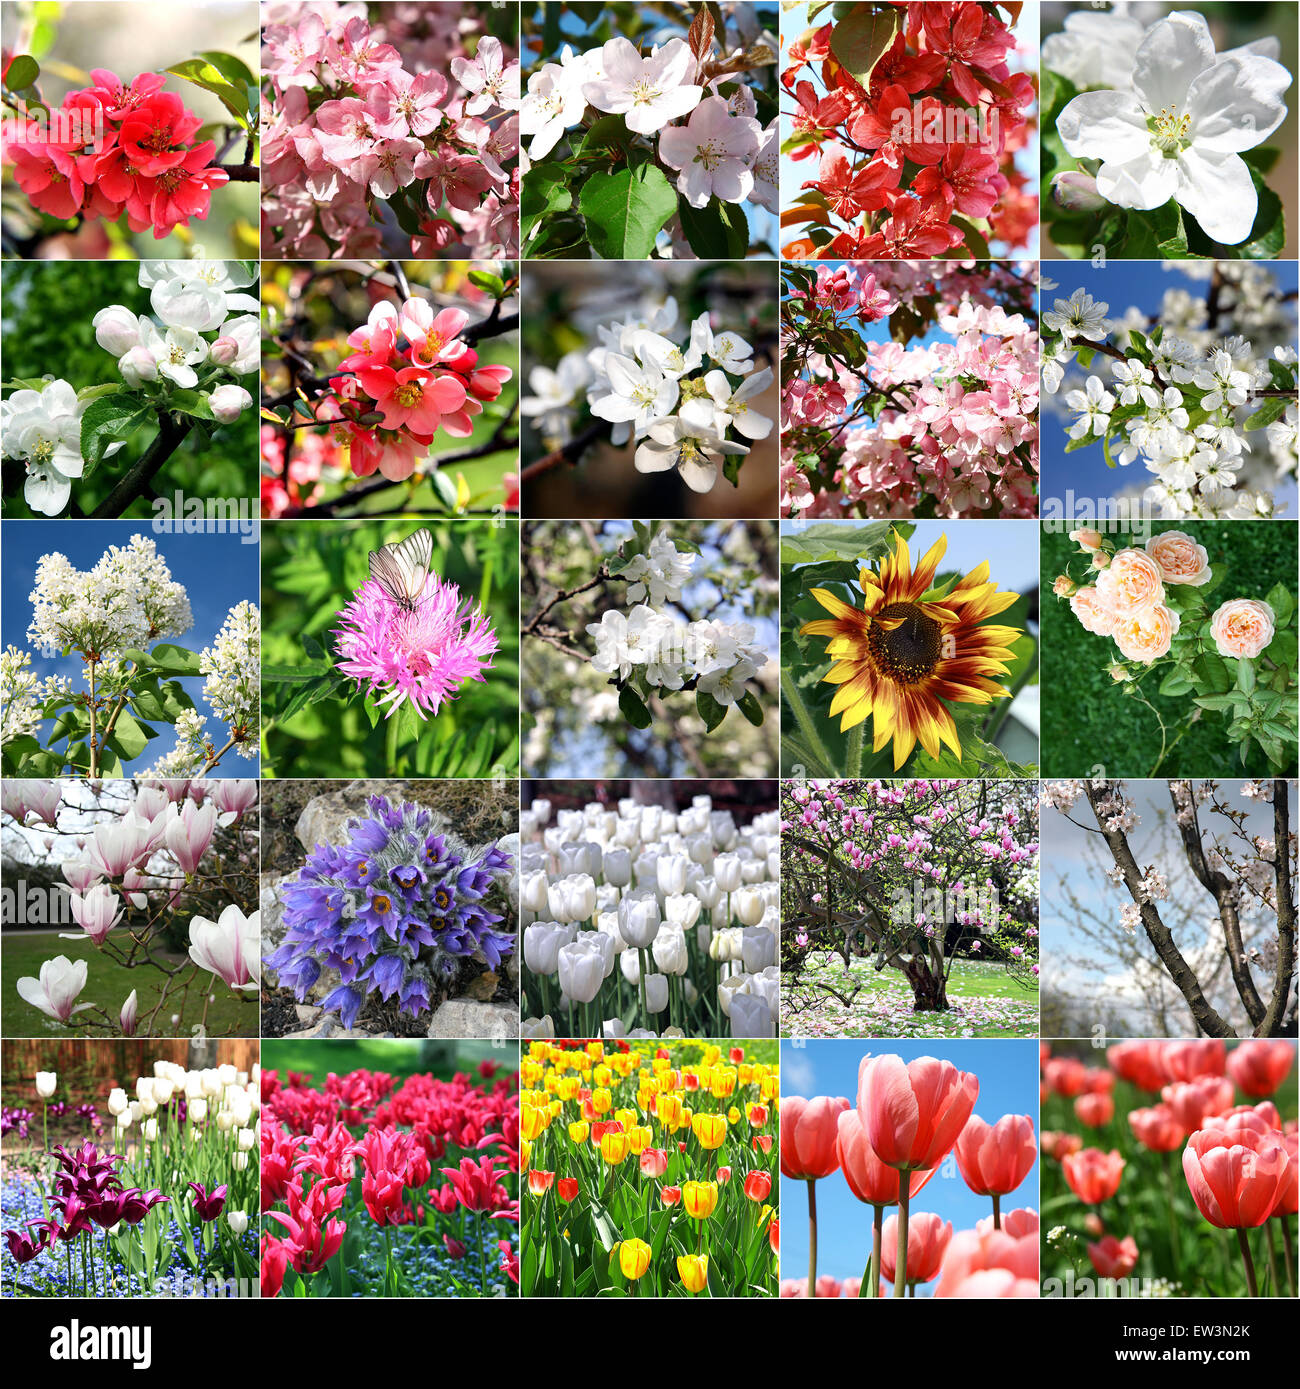 Collage with lots of colorful flowers Stock Photo